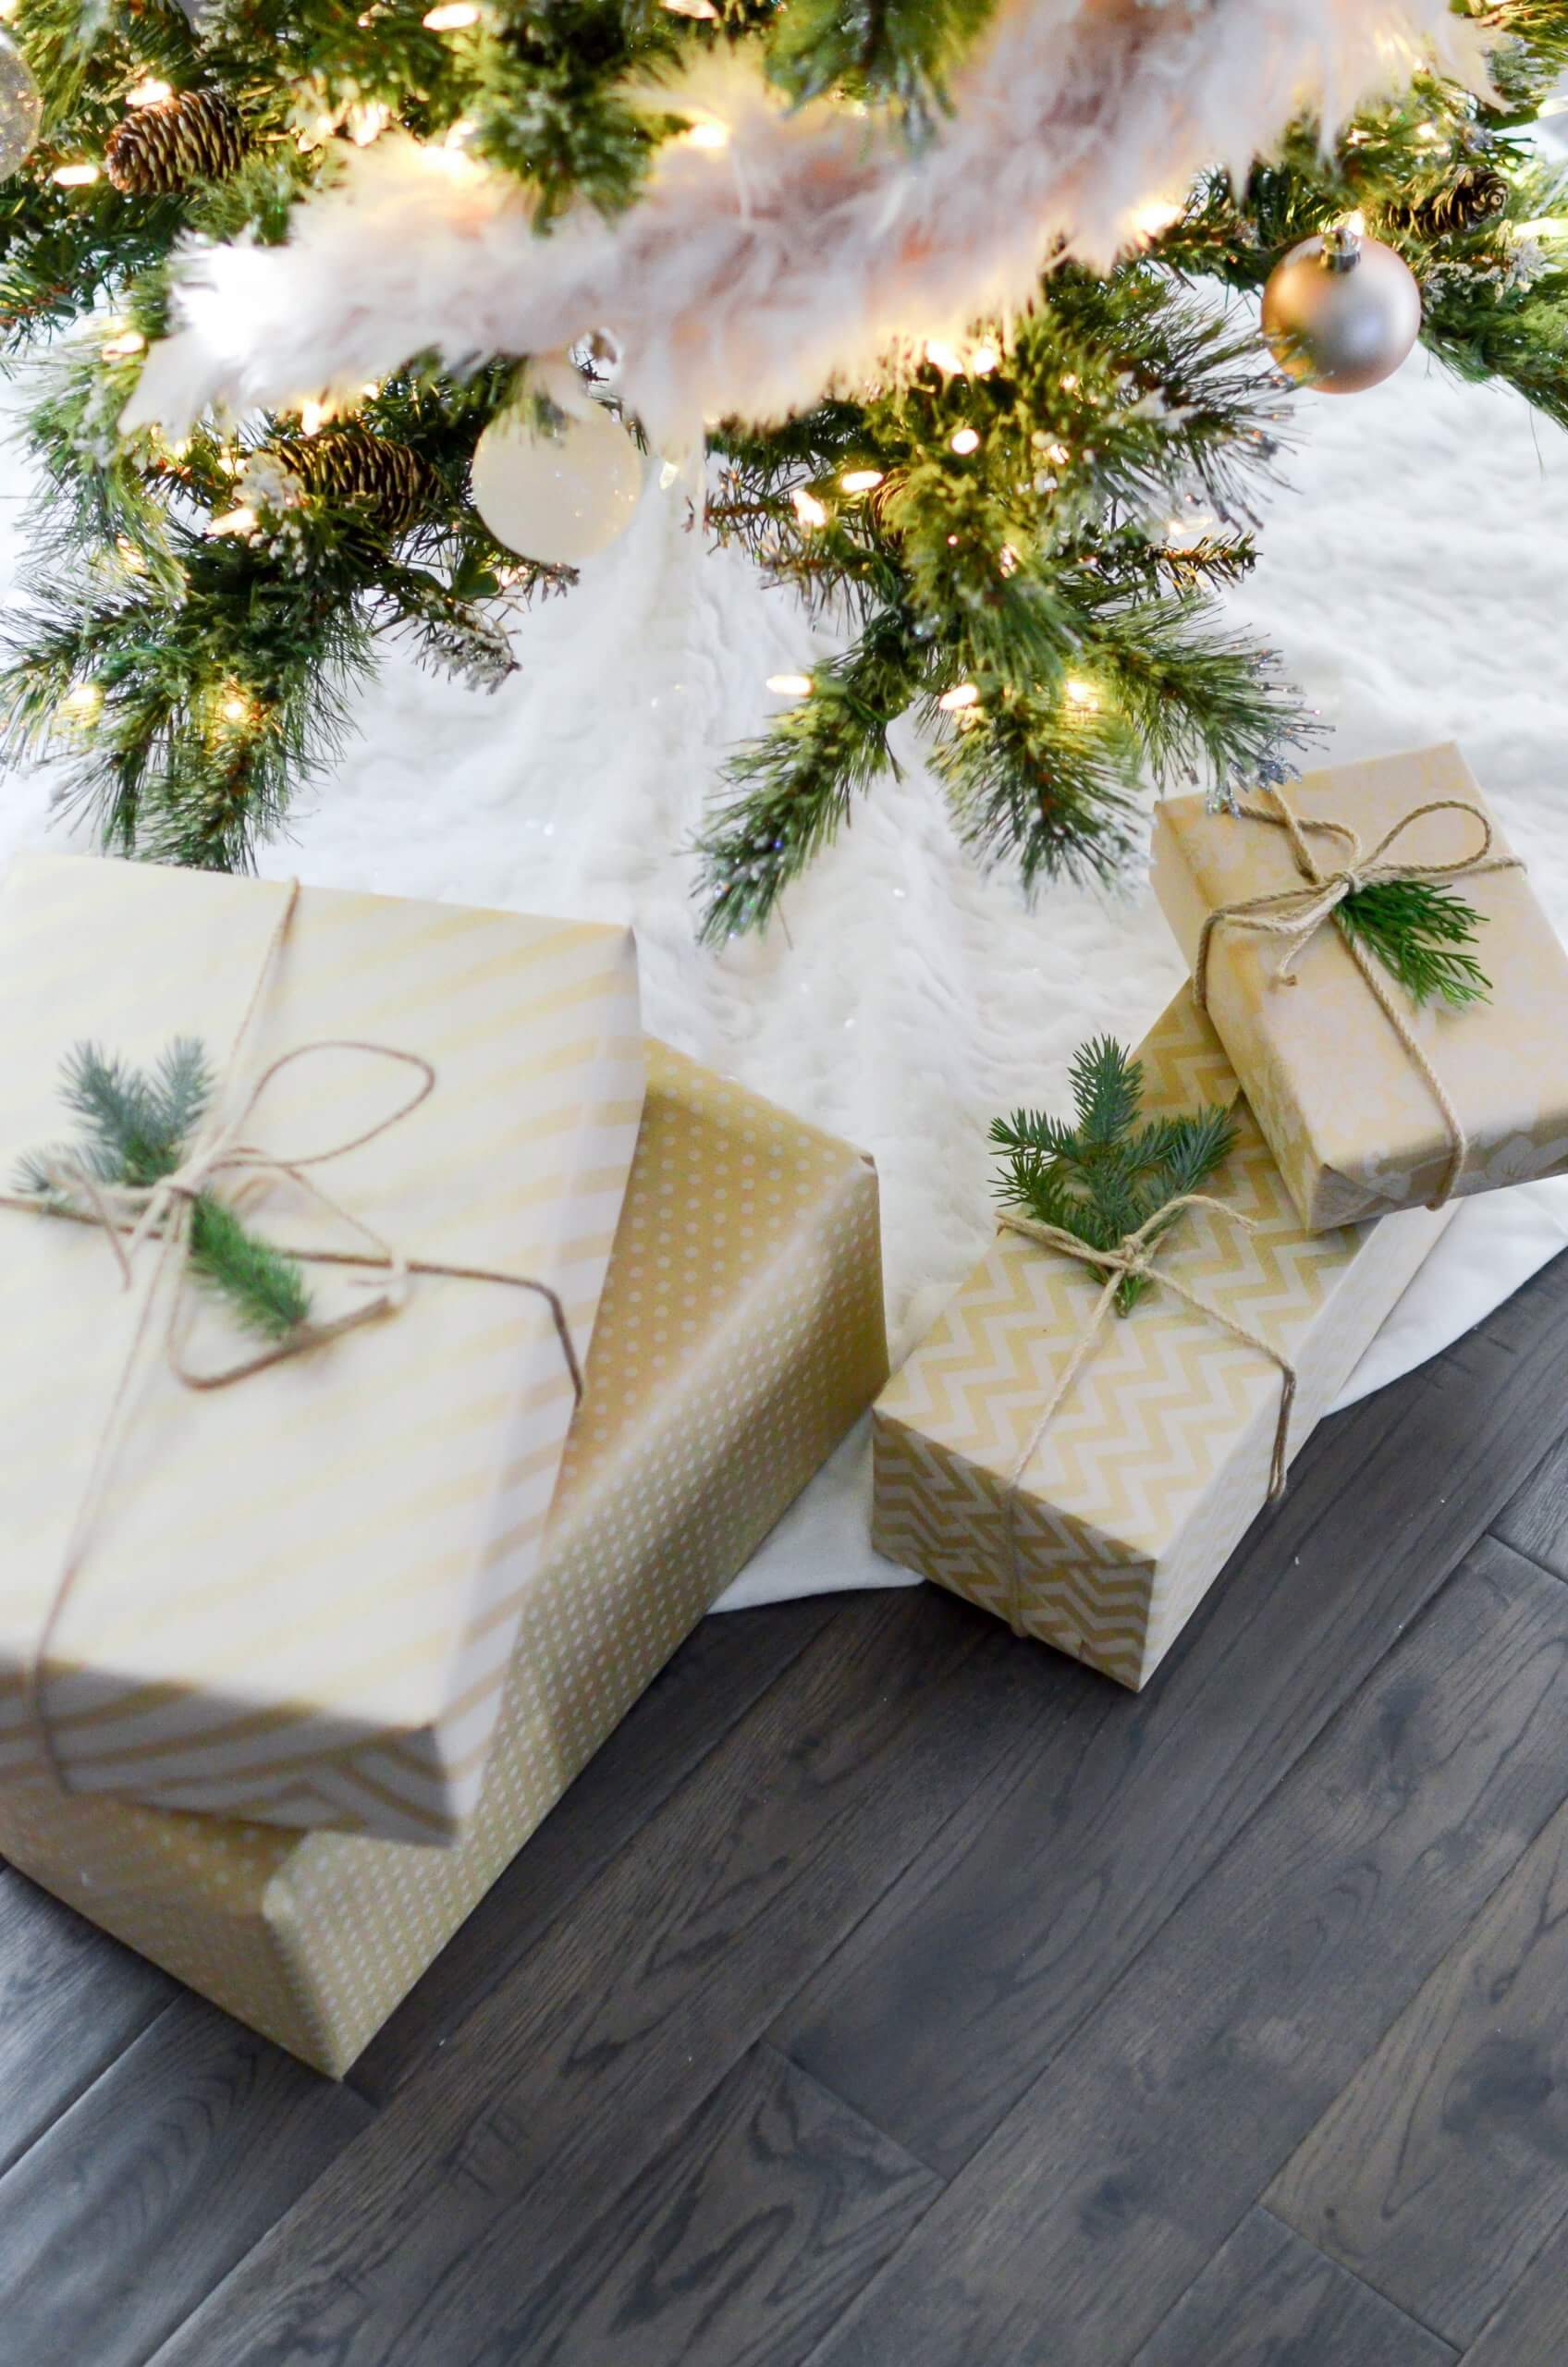 wrapped presents under the tree